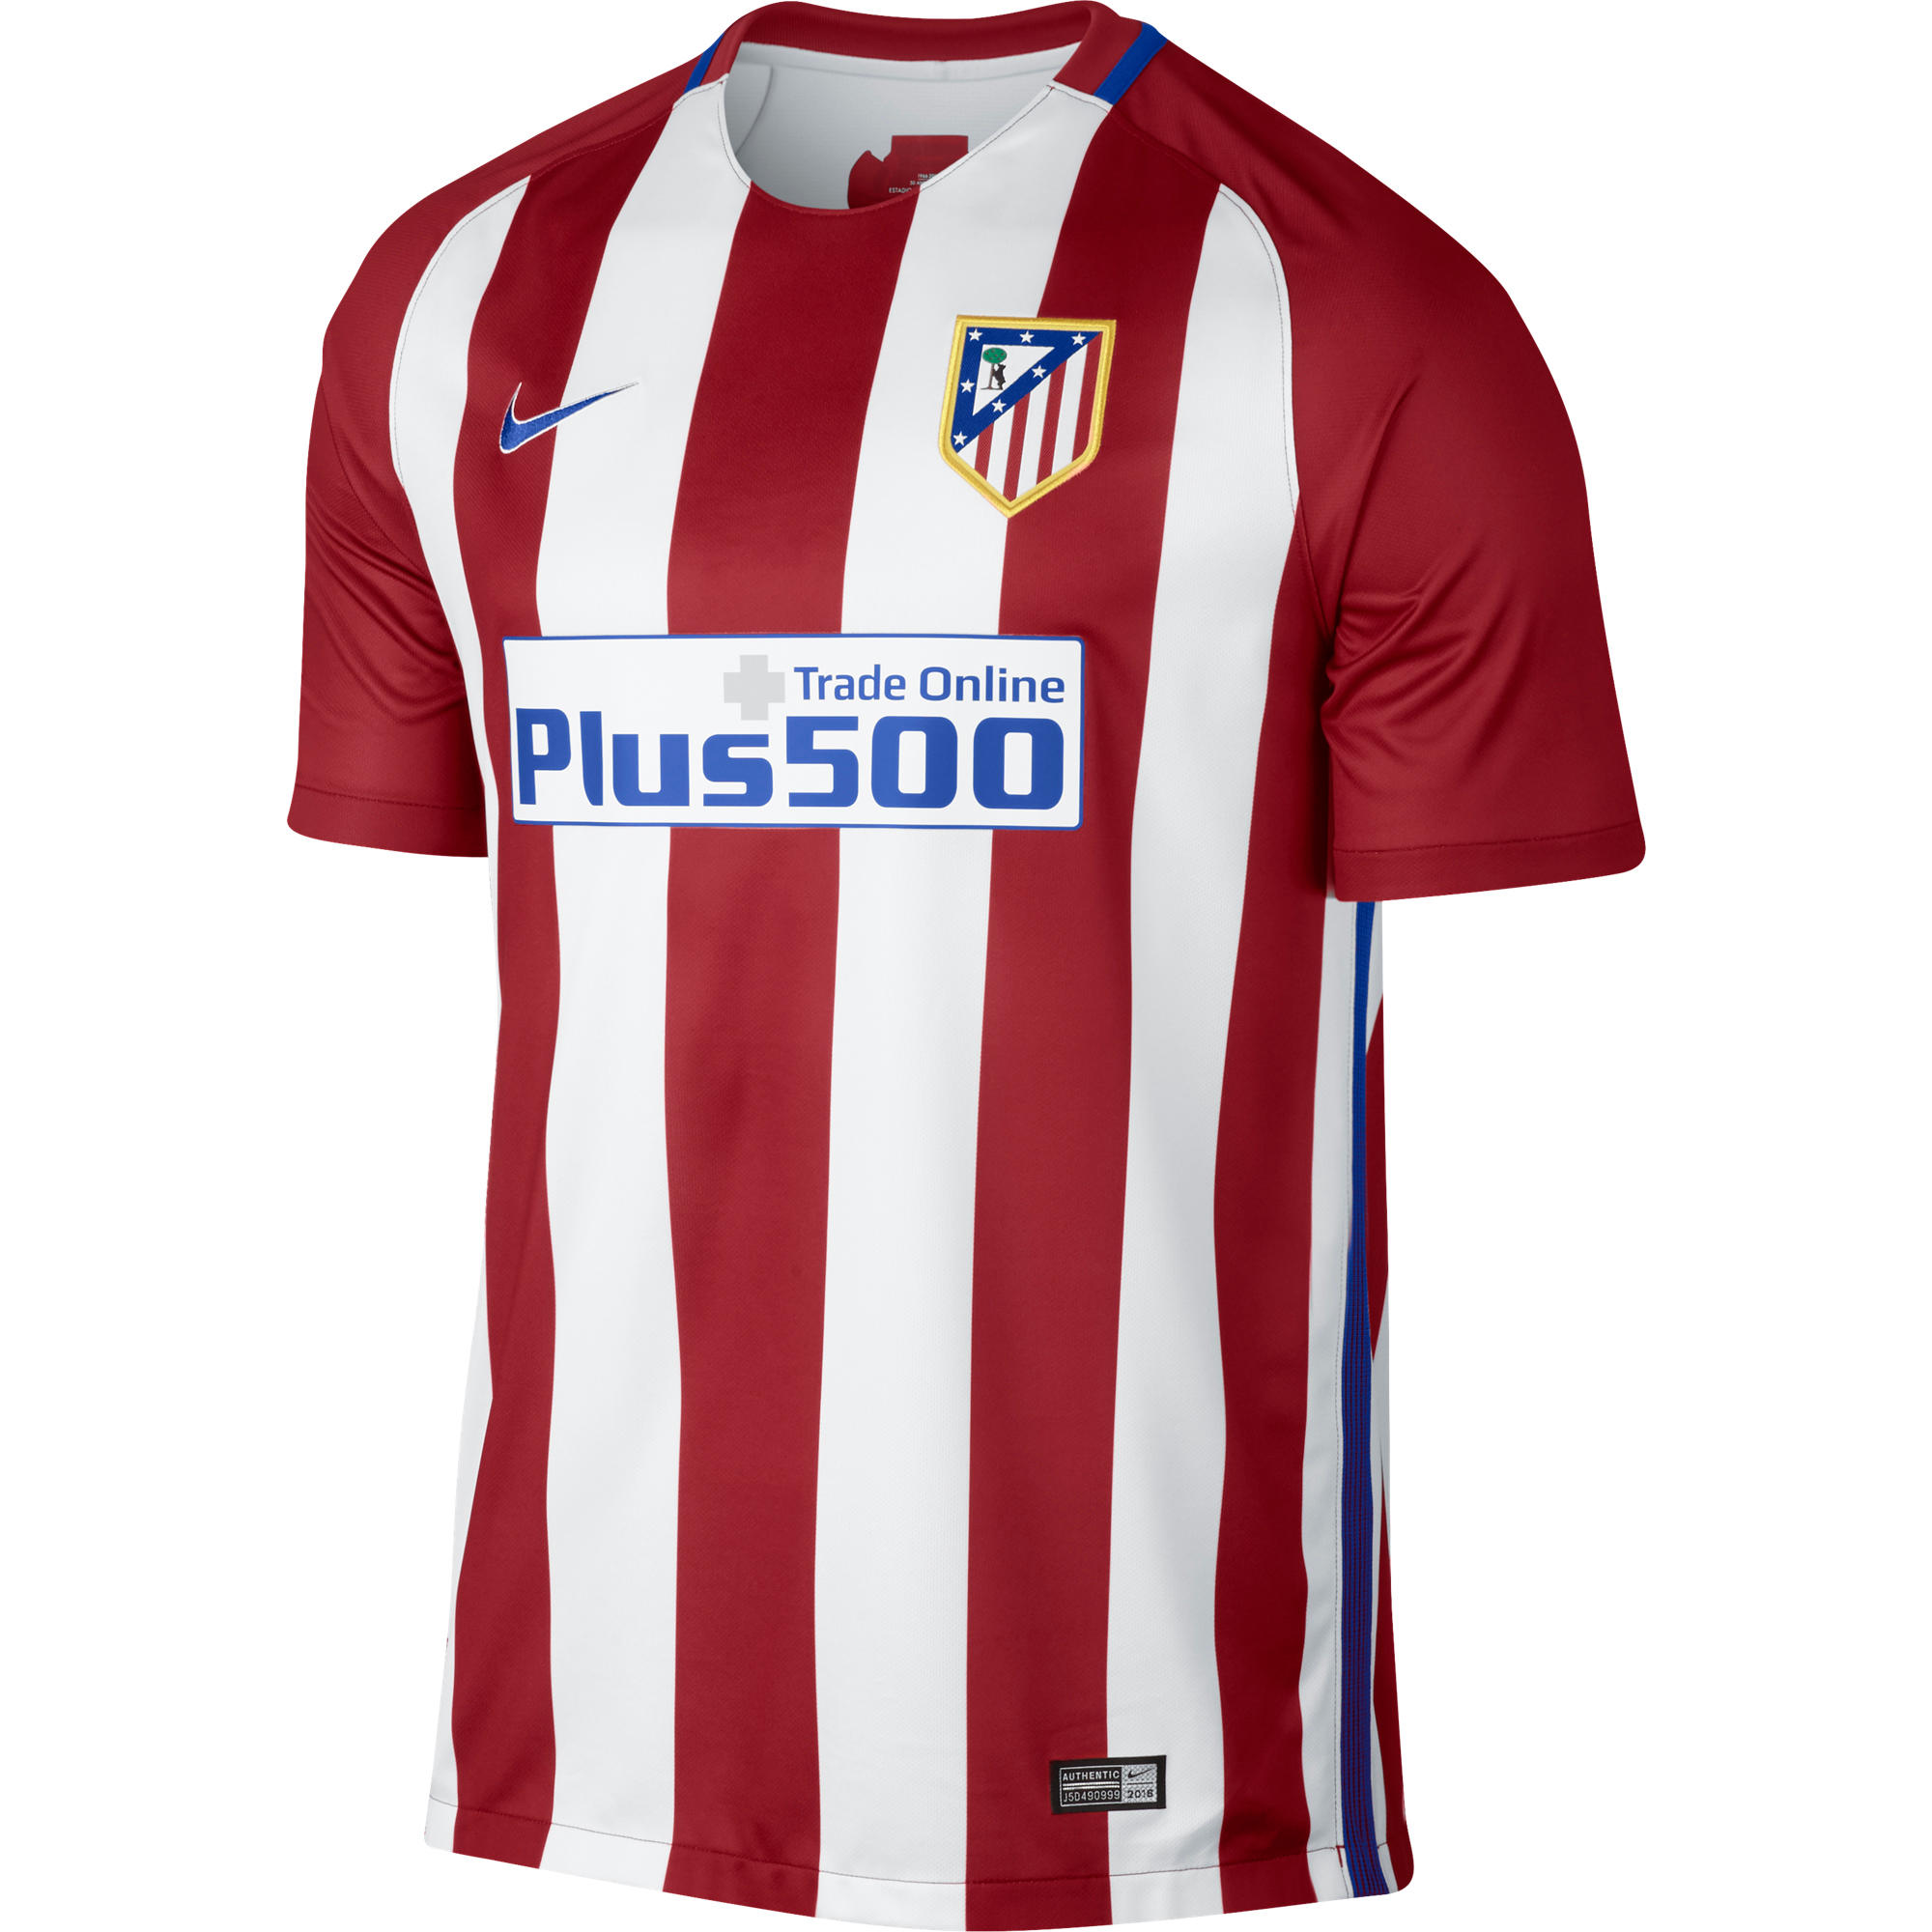 NIKE Atletico Adult Football Replica Shirt - Red White